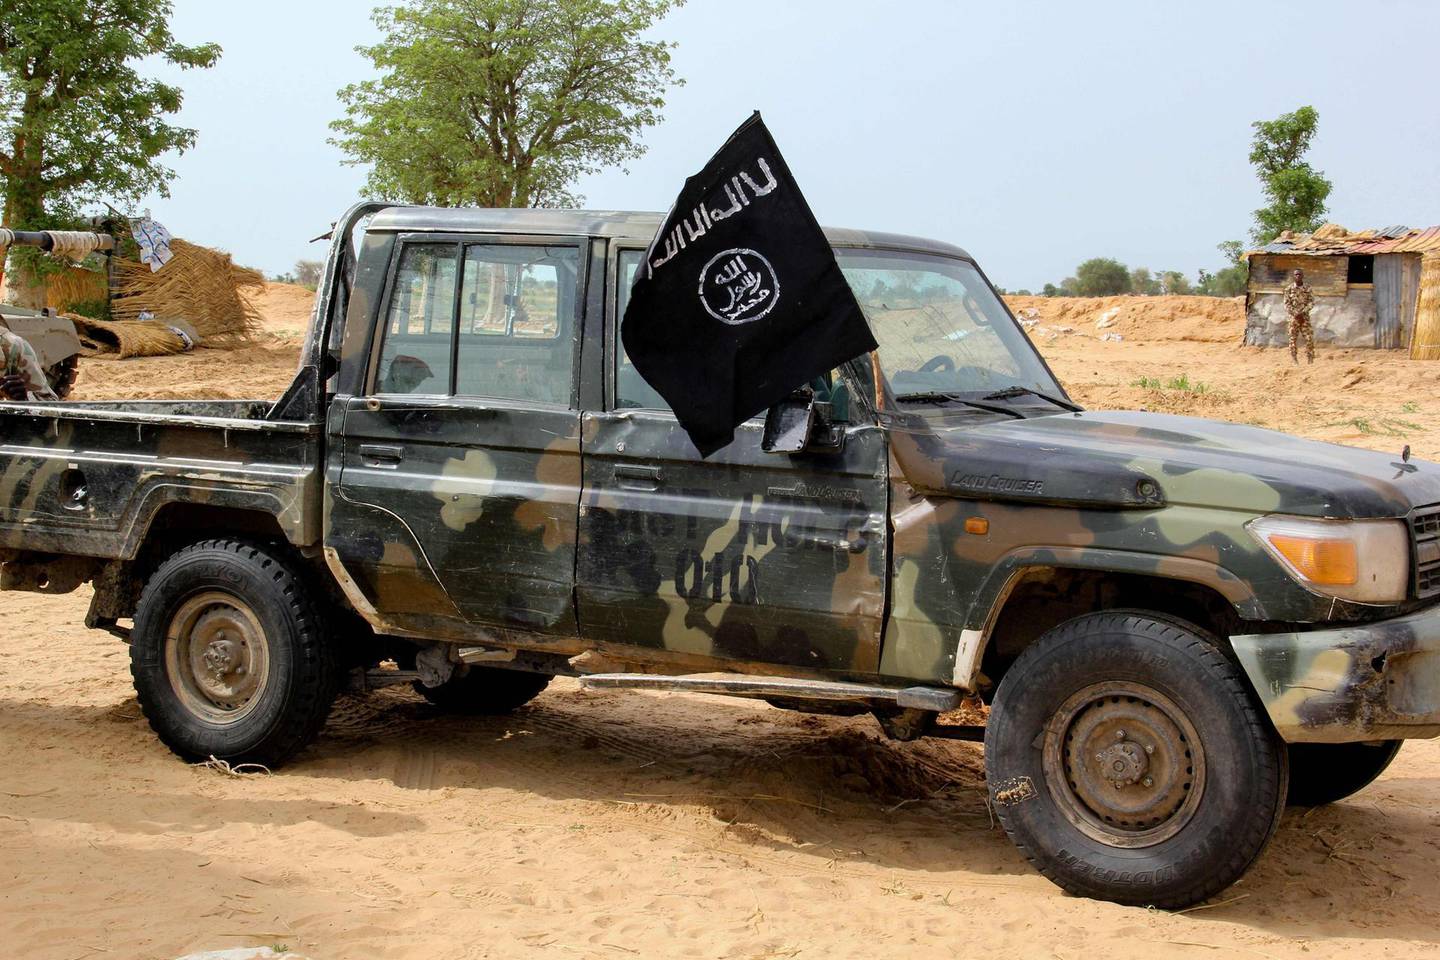 A vehicle allegedly belonging to the Islamic State group in West Africa (ISWAP) is seen in Baga on August 2, 2019. Intense fighting between a regional force and the Islamic State group in West Africa (ISWAP) has resulted in dozens of deaths, including at least 25 soldiers and more than 40 jihadists, in northeastern Nigeria.
ISWAP broke away from Boko Haram in 2016 in part due to its rejection of indiscriminate attacks on civilians. Last year the group witnessed a reported takeover by more hardline fighters who sidelined its leader and executed his deputy. The IS-affiliate has since July 2018 ratcheted up a campaign of attacks against military targets. / AFP / AUDU MARTE
